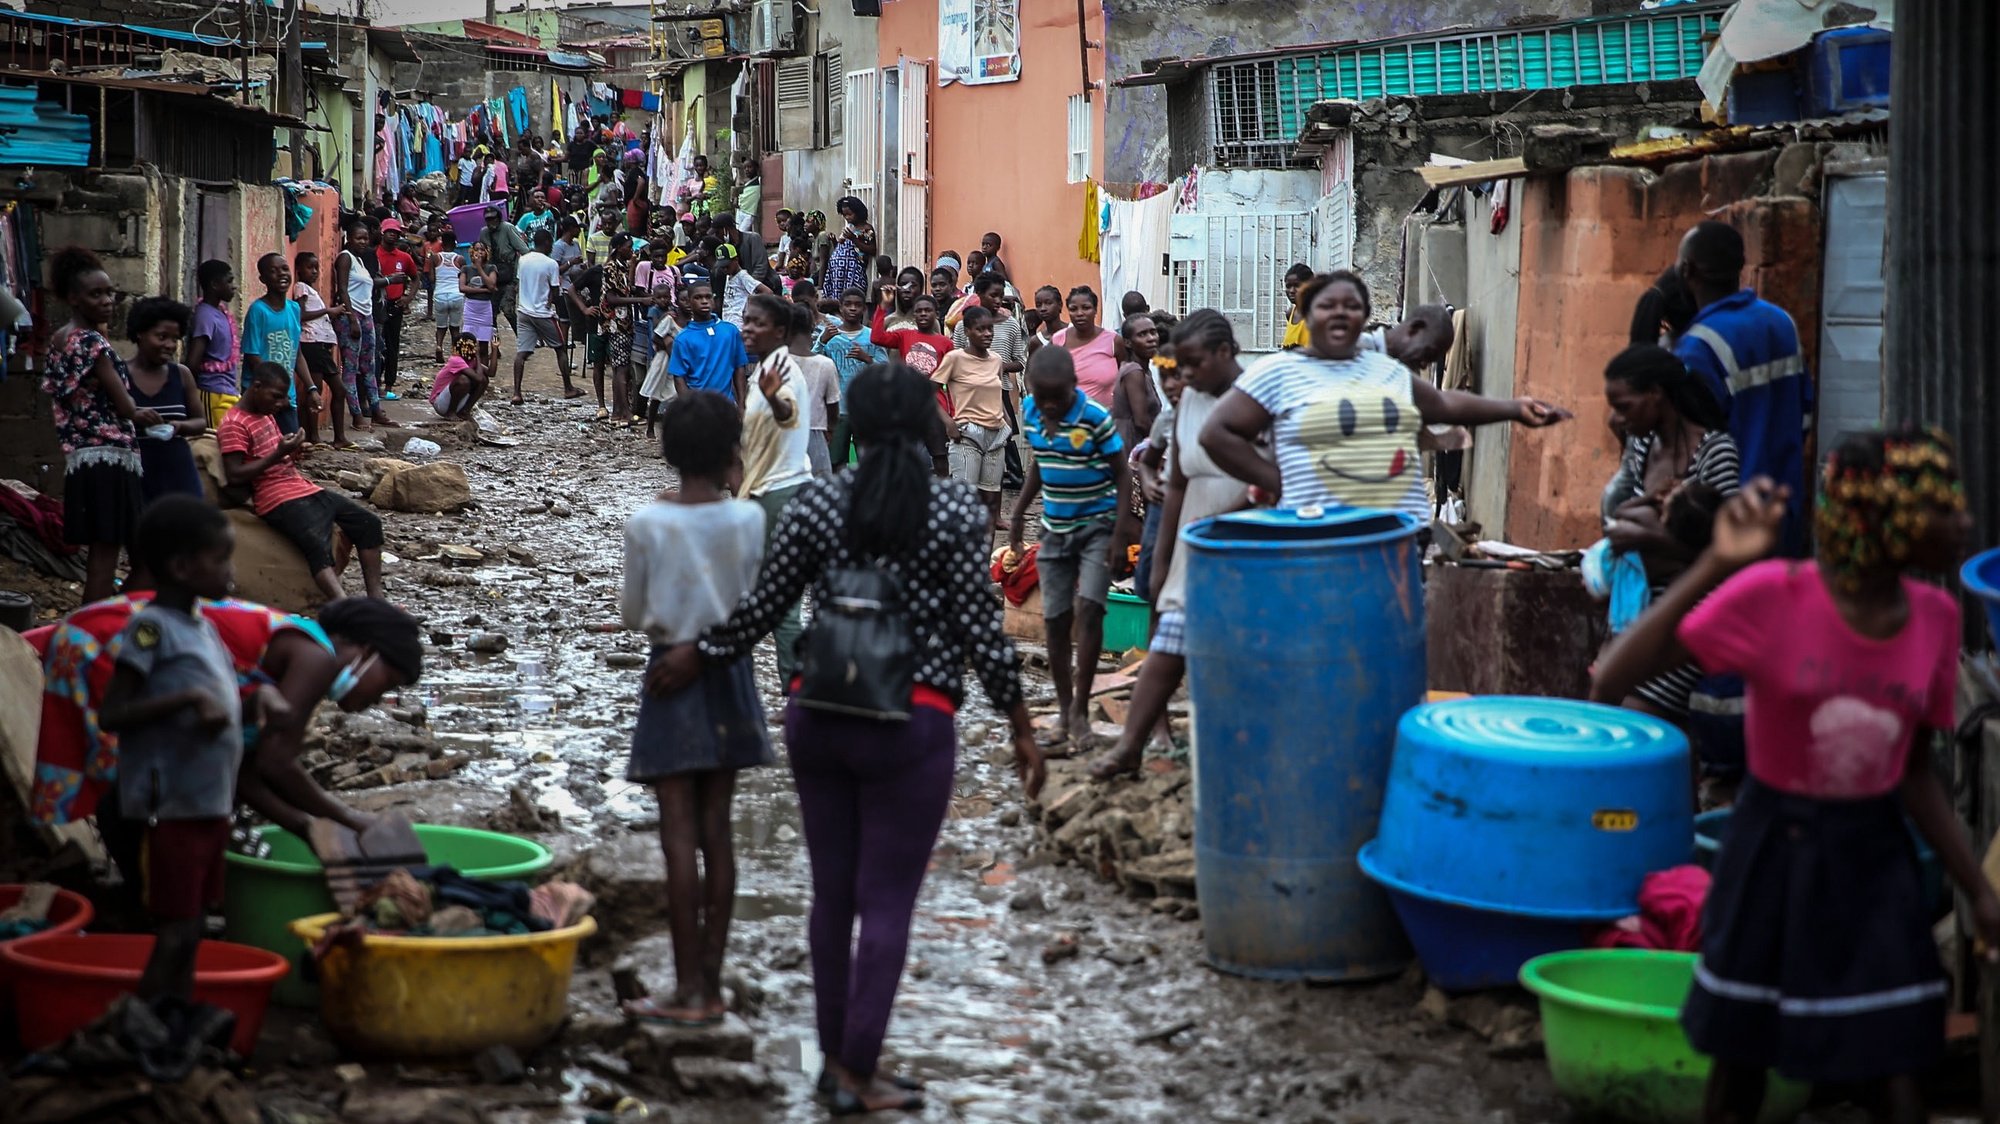 epa09147887 People on a muddy street after heavy rain that fell Monday night in Encide neighborhood, in the Sambizanga district, on the outskirts of Luanda, Angola, 20 April 2021. The torrential rains that hit Luanda on 19 April killed 14 people and left 8,000 displaced, with 16 houses collapsed, 15 trees fell, and a bridge was destroyed, among other damages yet to be calculated.  EPA/AMPE ROGERIO